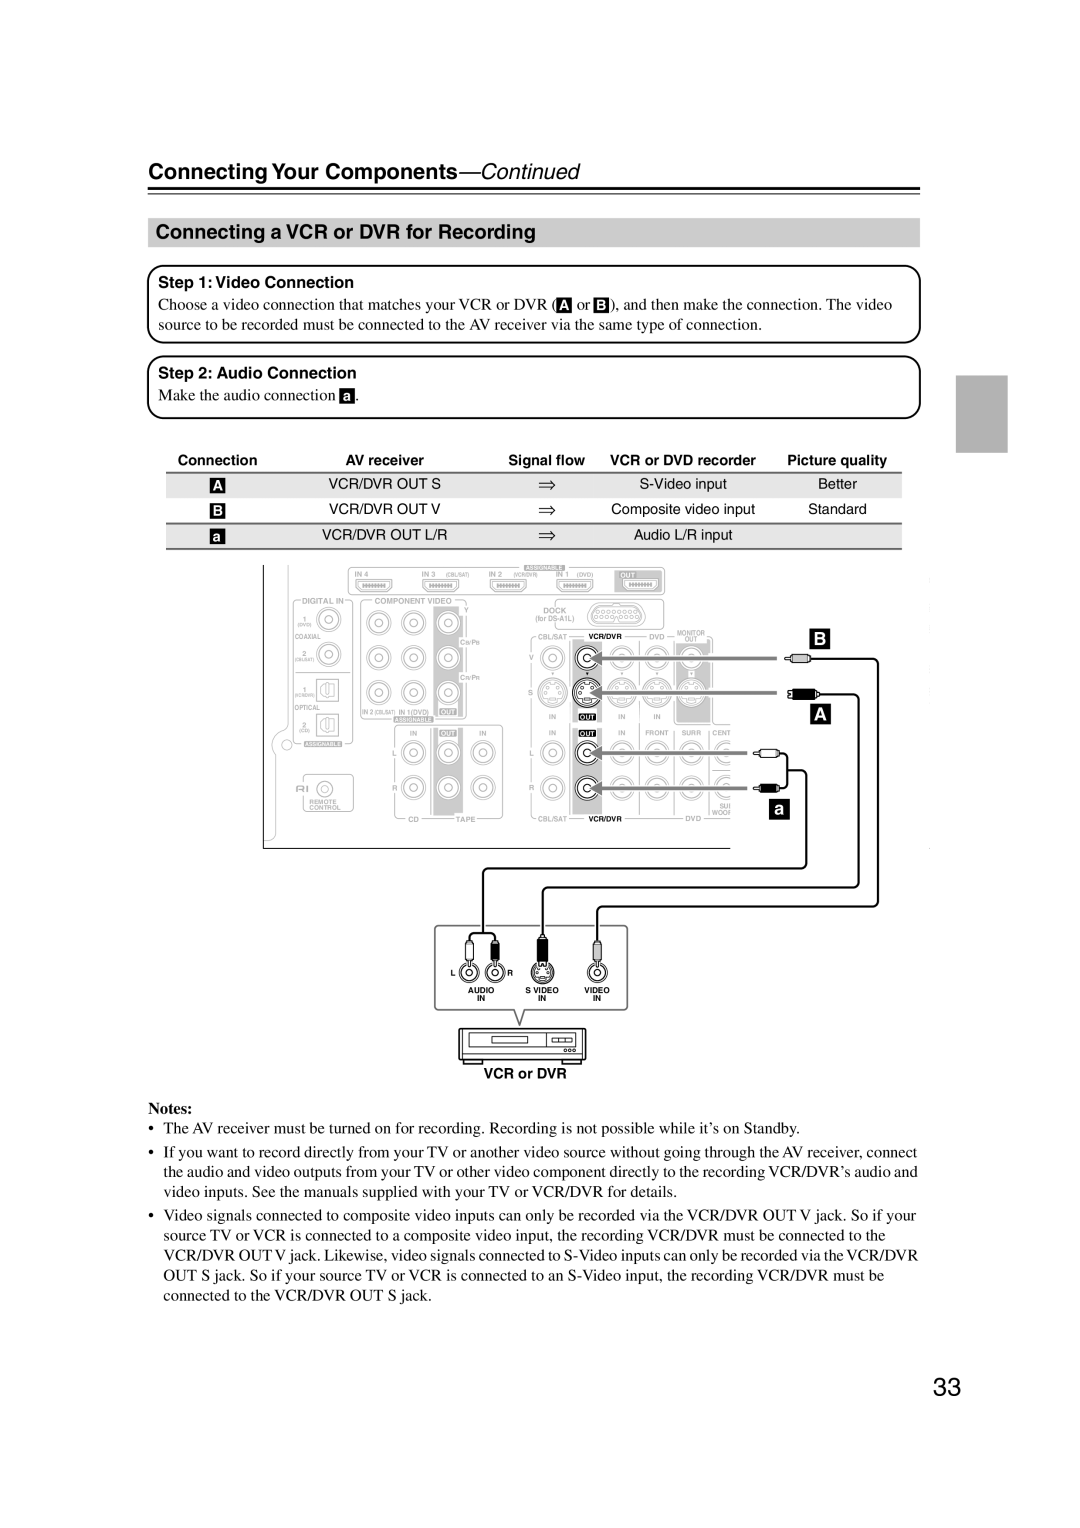 Onkyo HT-S6100 instruction manual Connecting a VCR or DVR for Recording, Connecting Your Components-Continued 